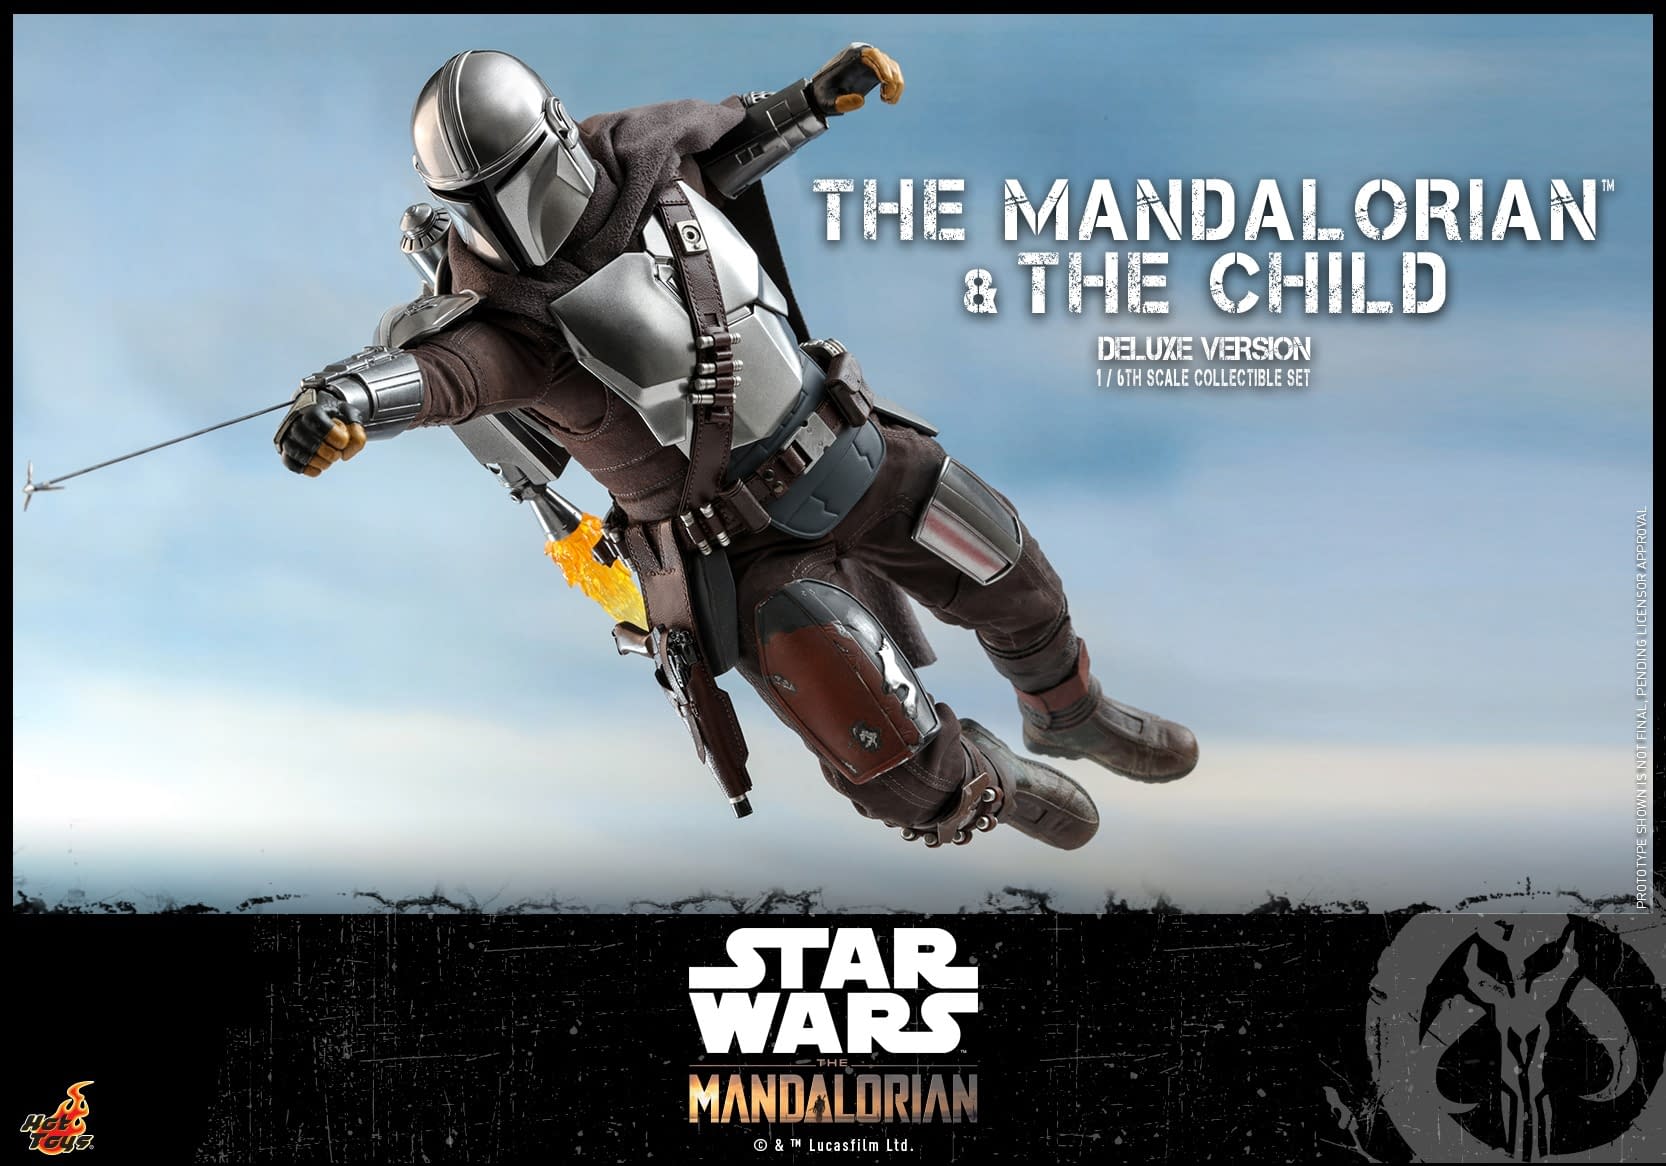 "The Mandalorian" and The Child Finally Arrive at Hot Toy